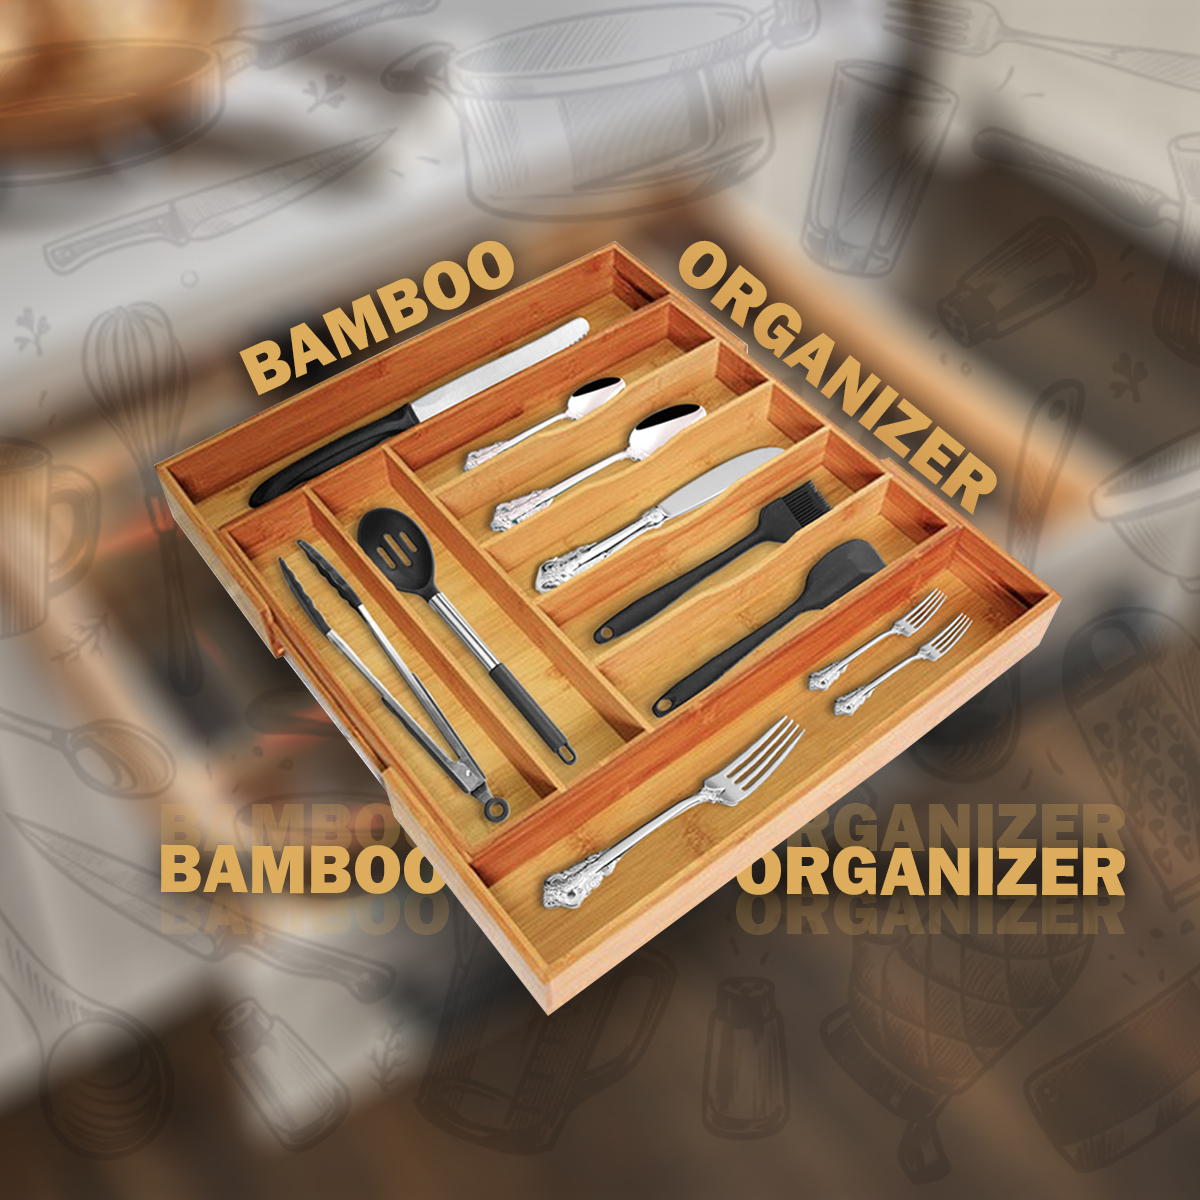 Keep your kitchen cutlery drawer looking neat and tidy with this sleek Bamboo drawer organizer.

Shop Bamboo drawer organizer link in bio.

#organizeme #bambooorganizer #kitchendrawer #kitchenracks #woodenracks #kitchenorganization #kitchenorganizer #founditonamazon